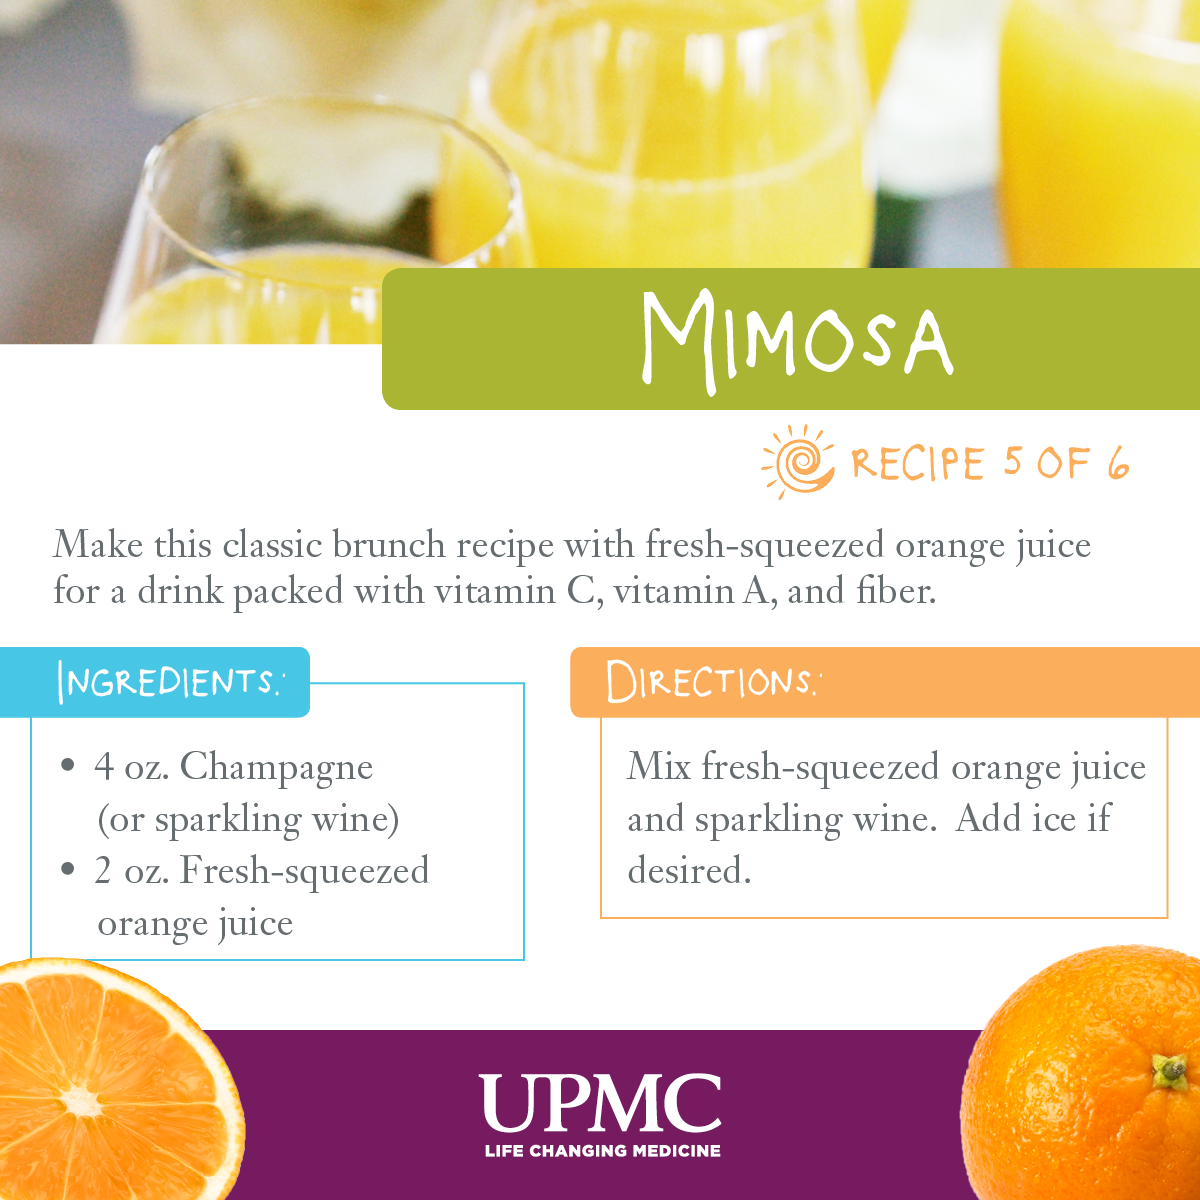 Try this healthy mimosa recipe to cut calories